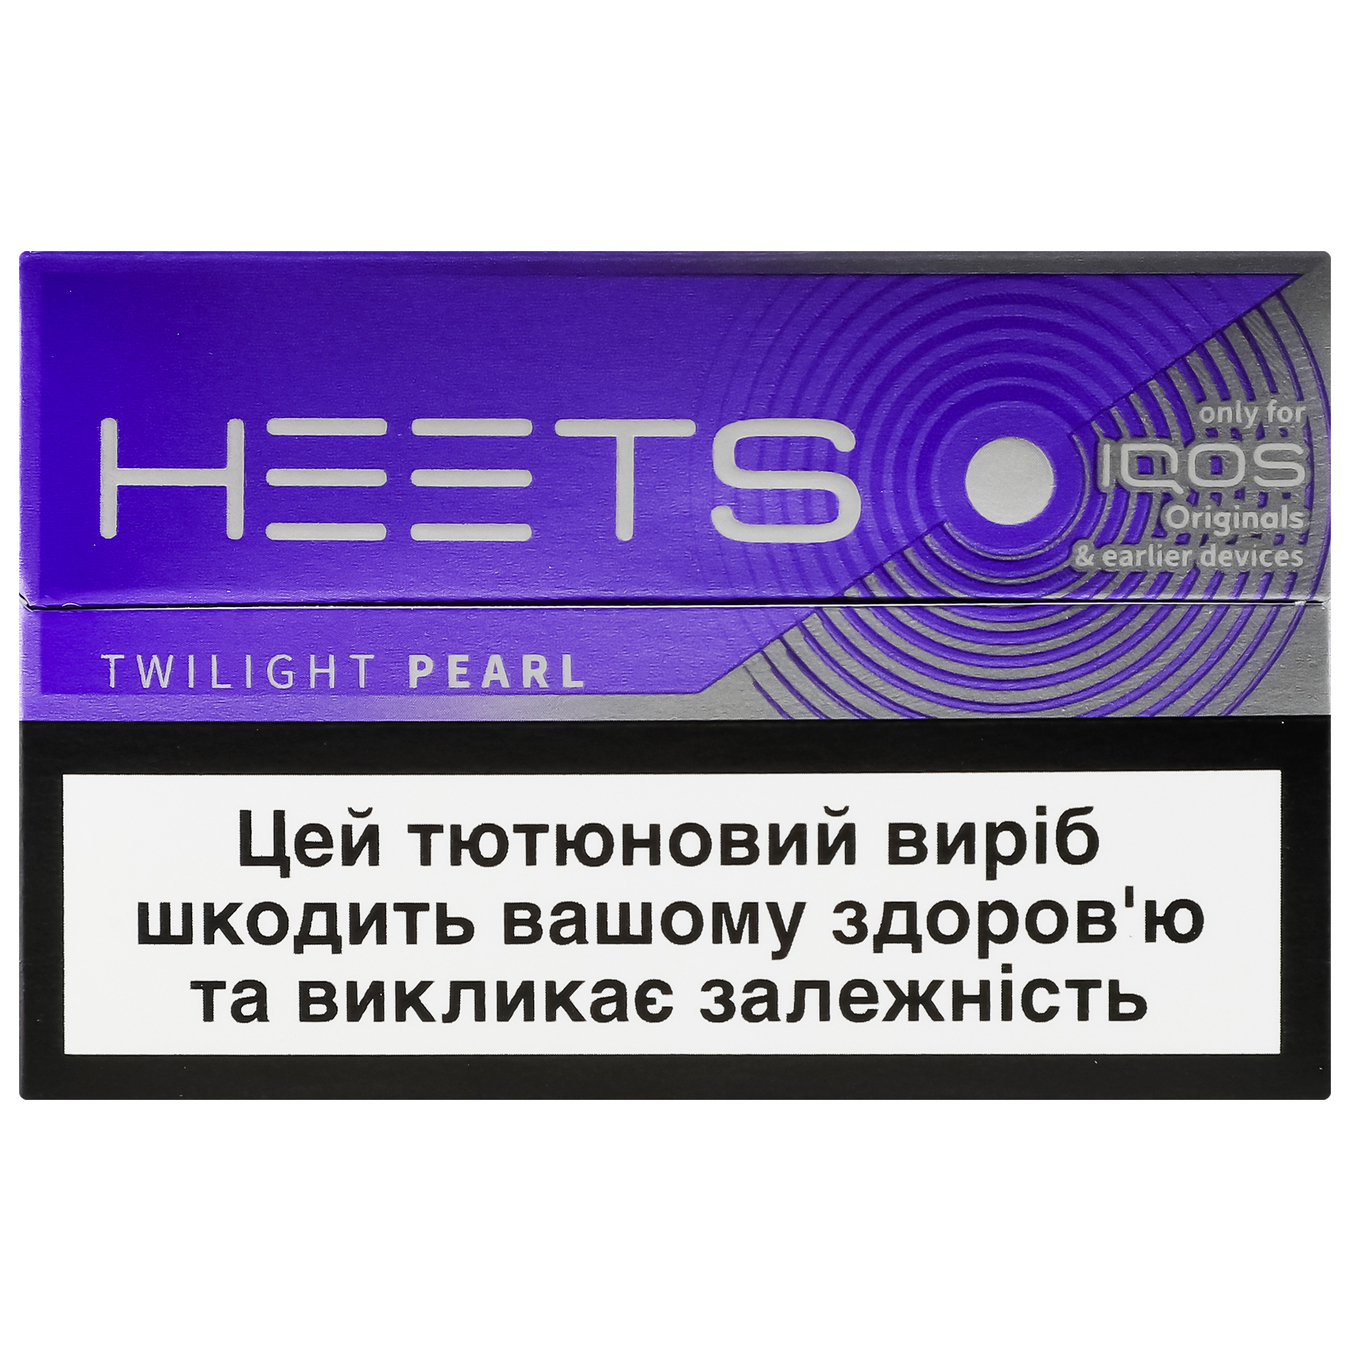 Sticks Heets Twilight Pearl 20pcs (the price is indicated without excise duty) (the price is indicated without excise duty)